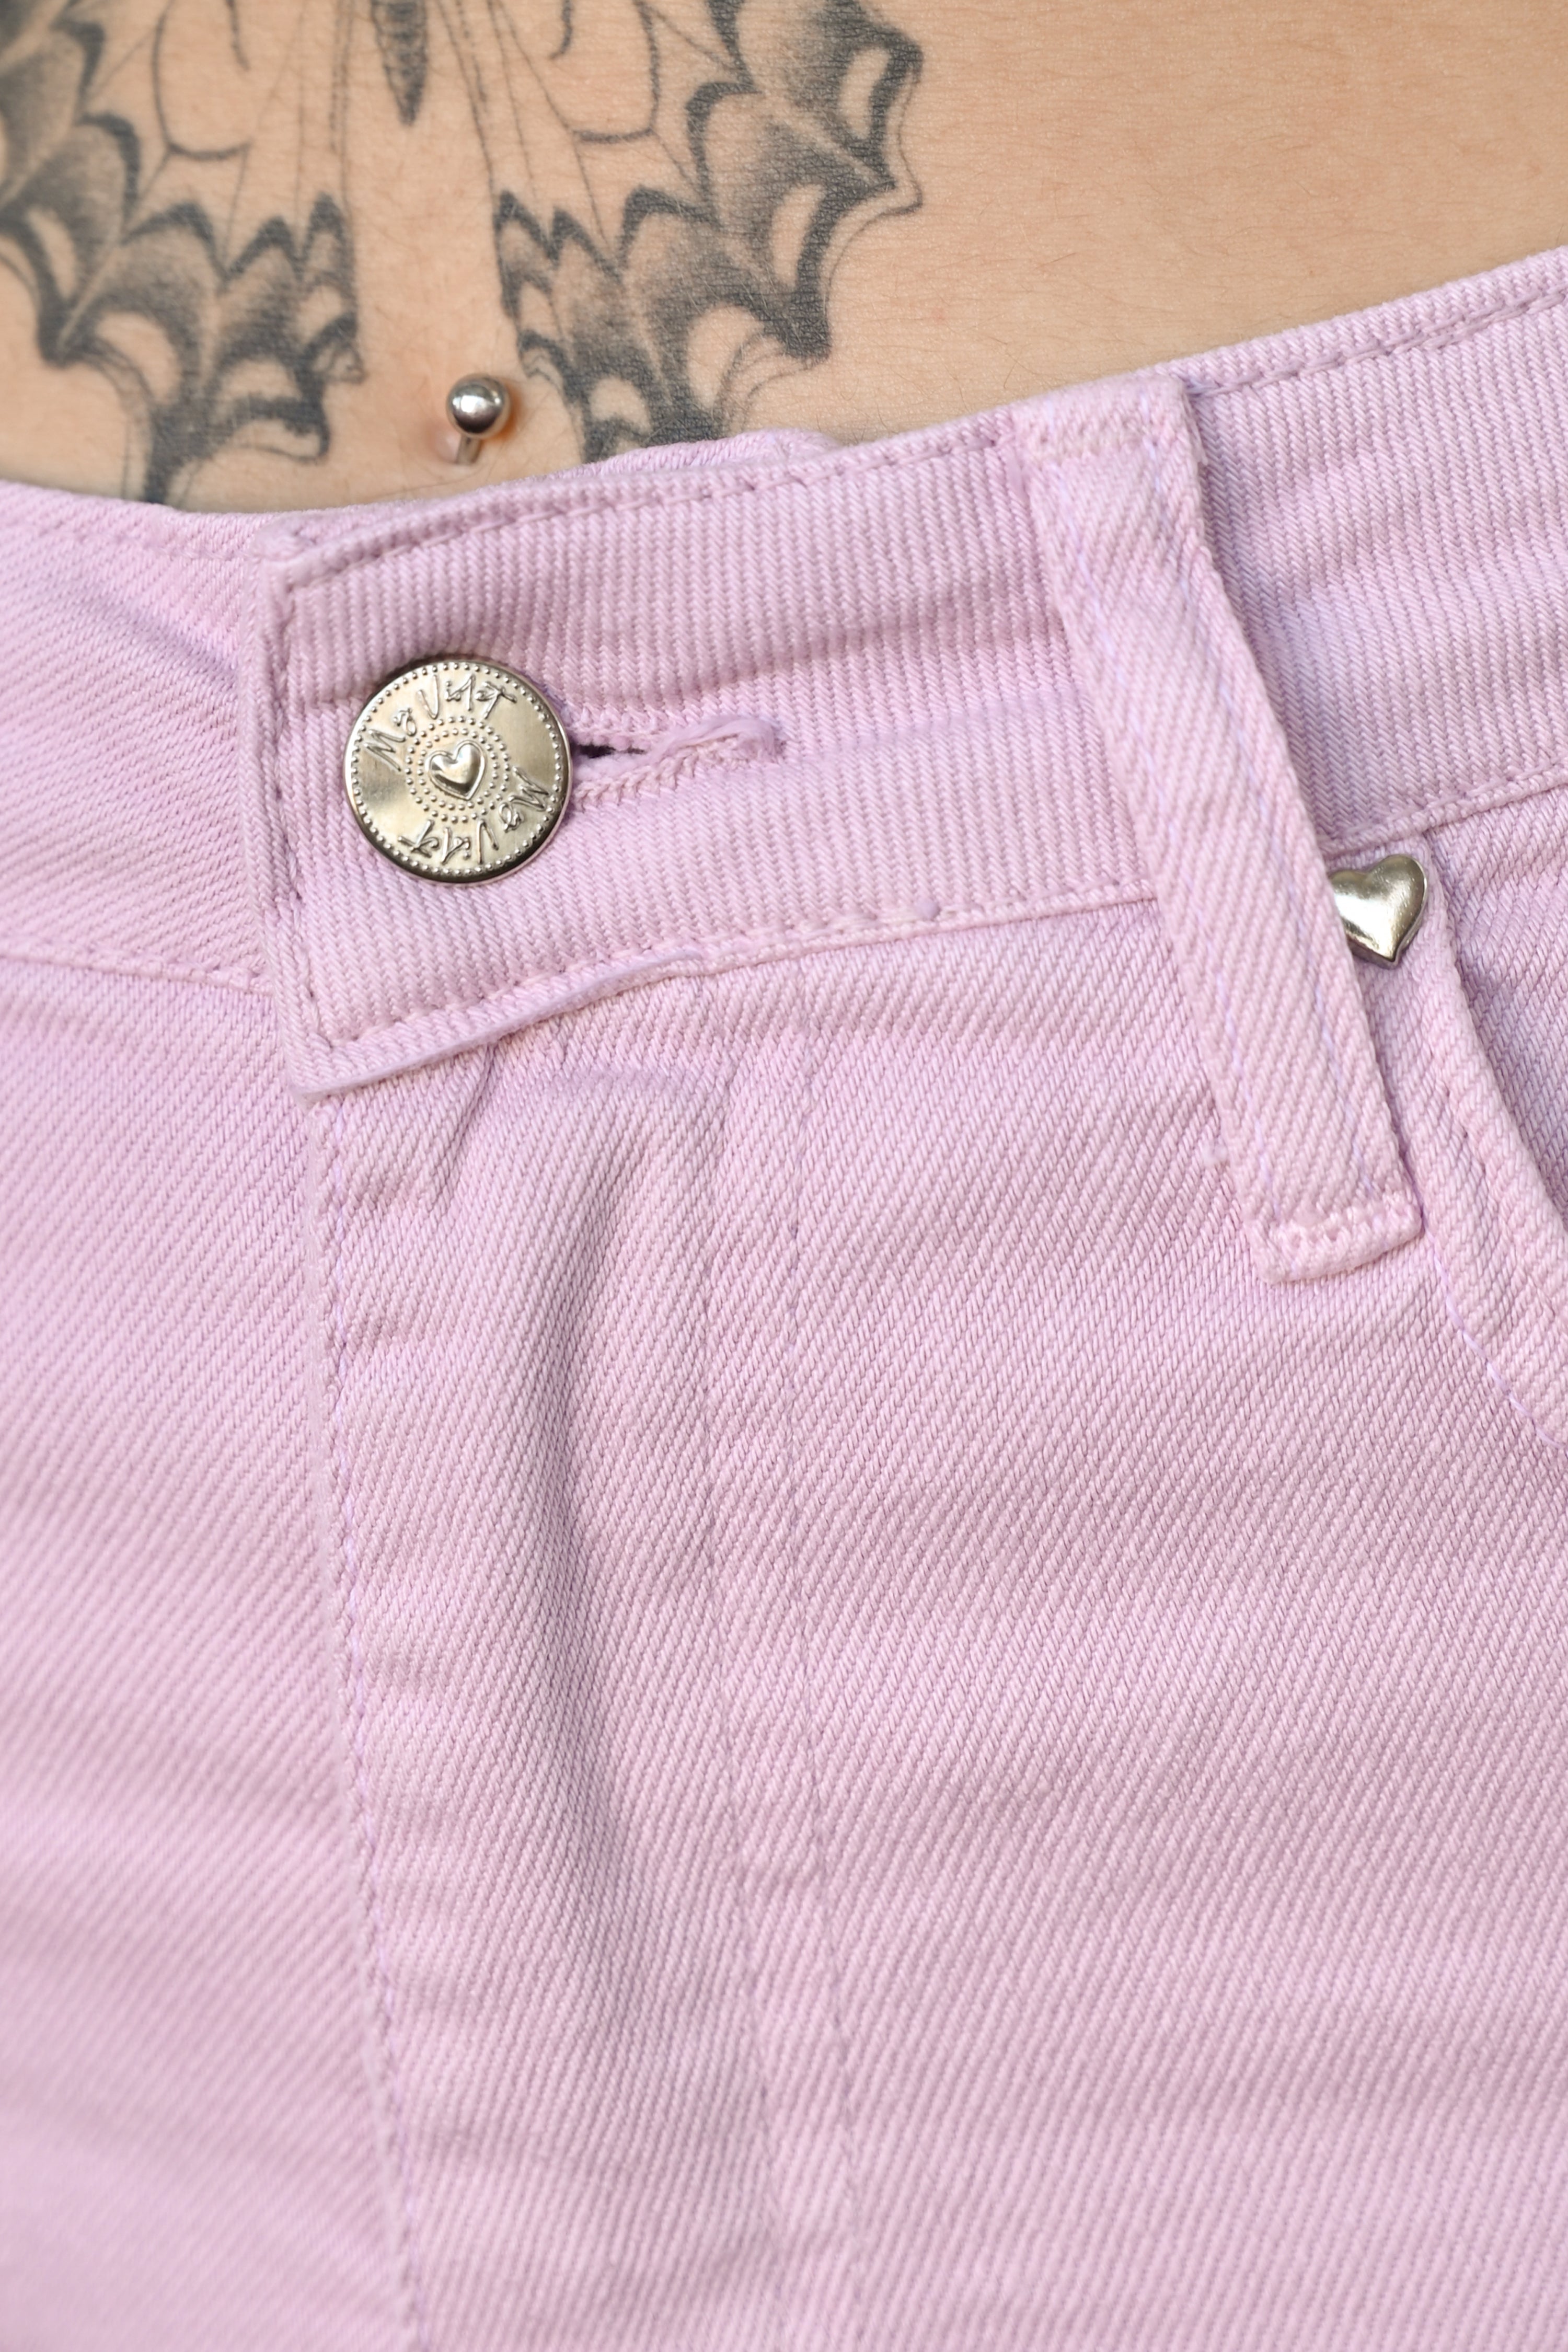 Close up of the MV front button and tiny heart pocket hardware